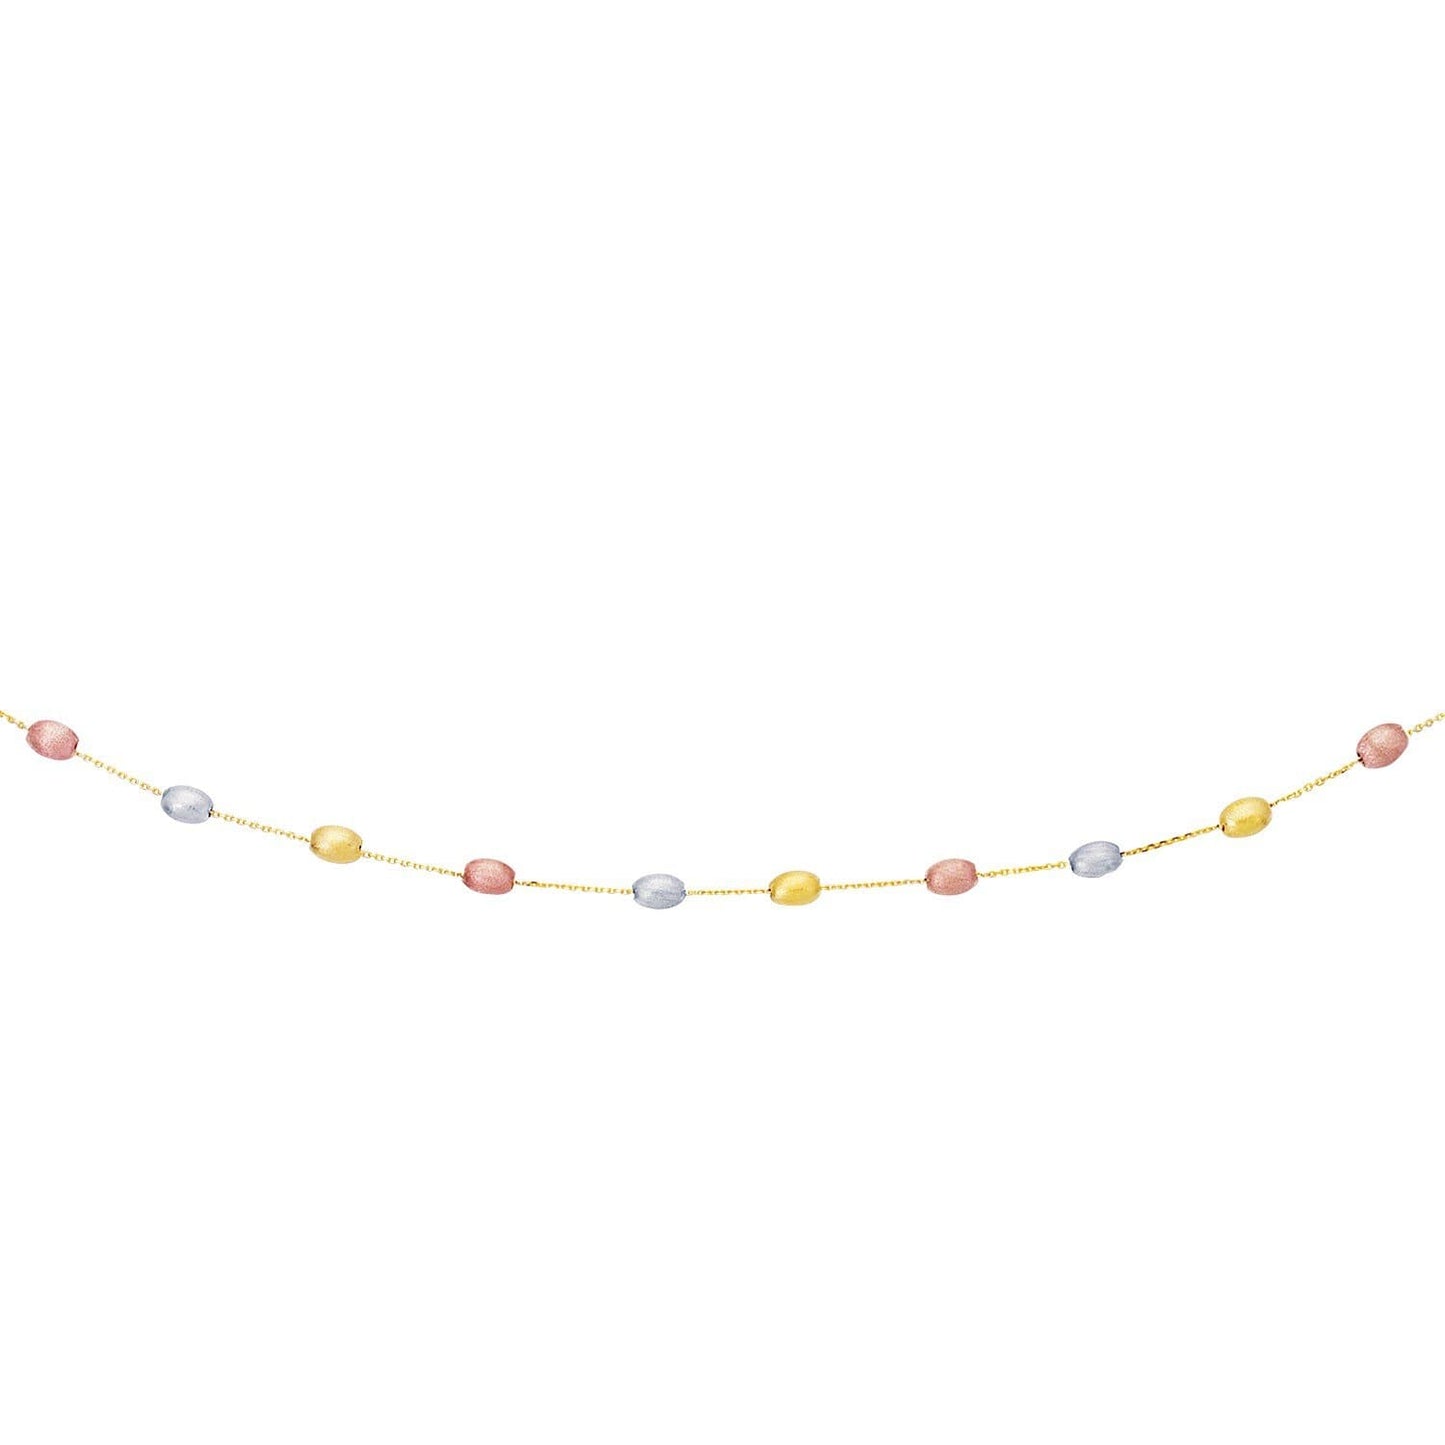 14k Tri-Color Gold Necklace with Fancy Textured Pebble Stations